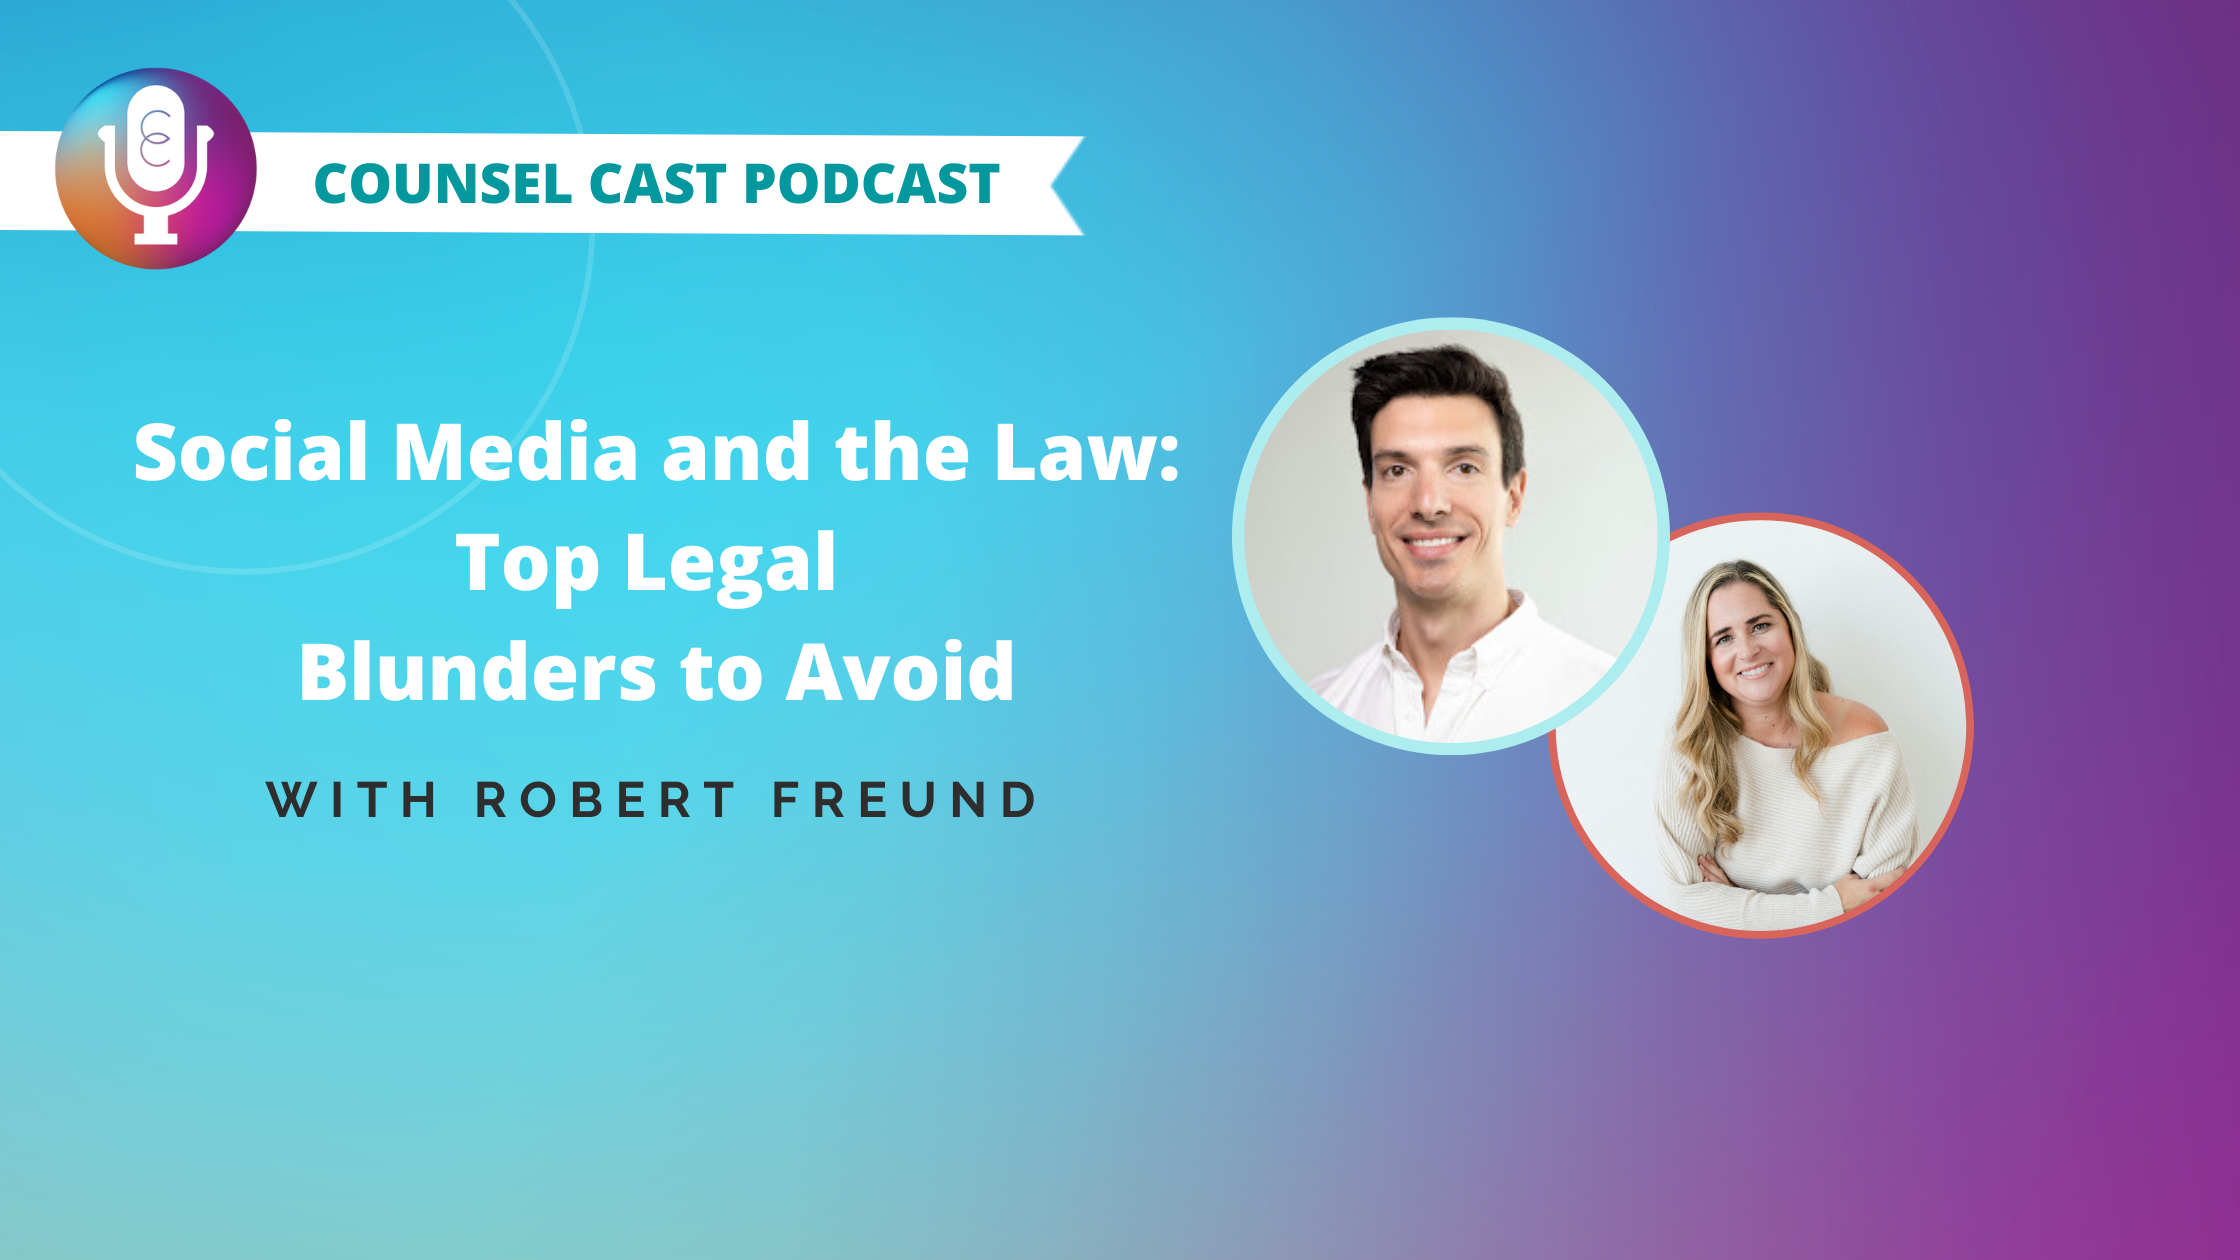 Social Media and the Law: Top Legal Blunders to Avoid with Robert Freund